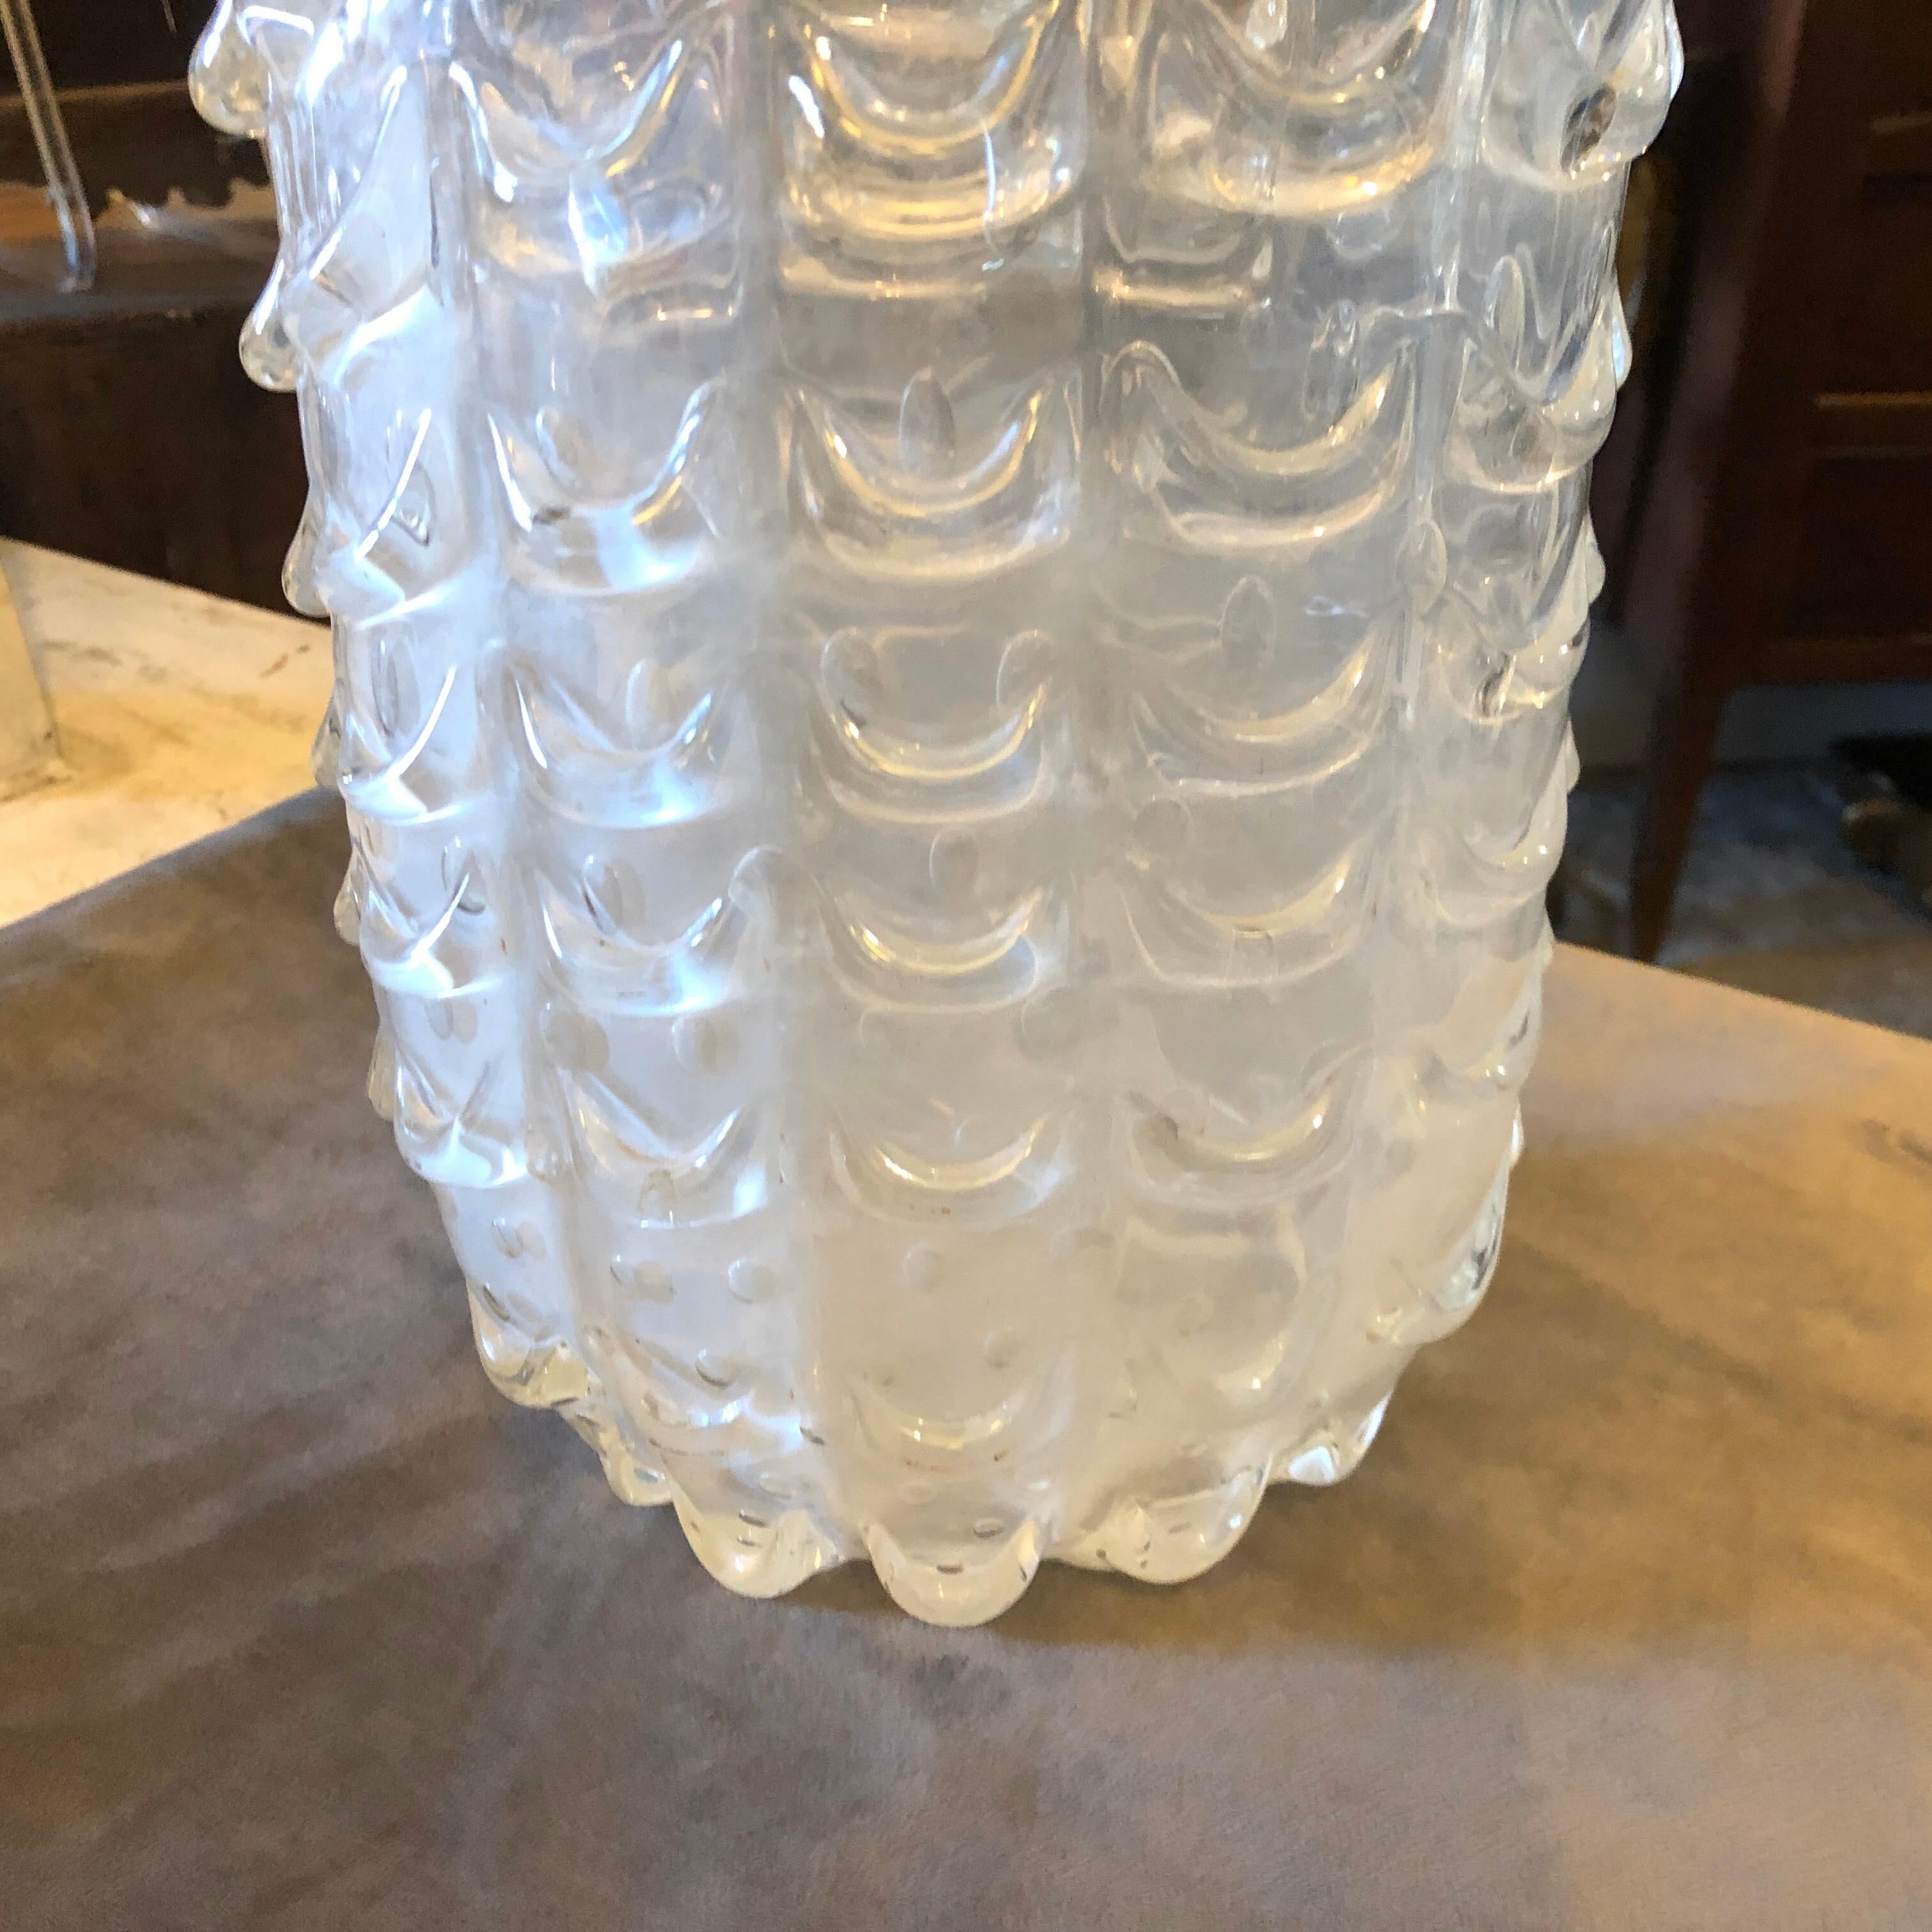 An handcrafted Mid-Century Modern Murano glass vase by Ercole Barovier. Glass is translucent and iridescent.